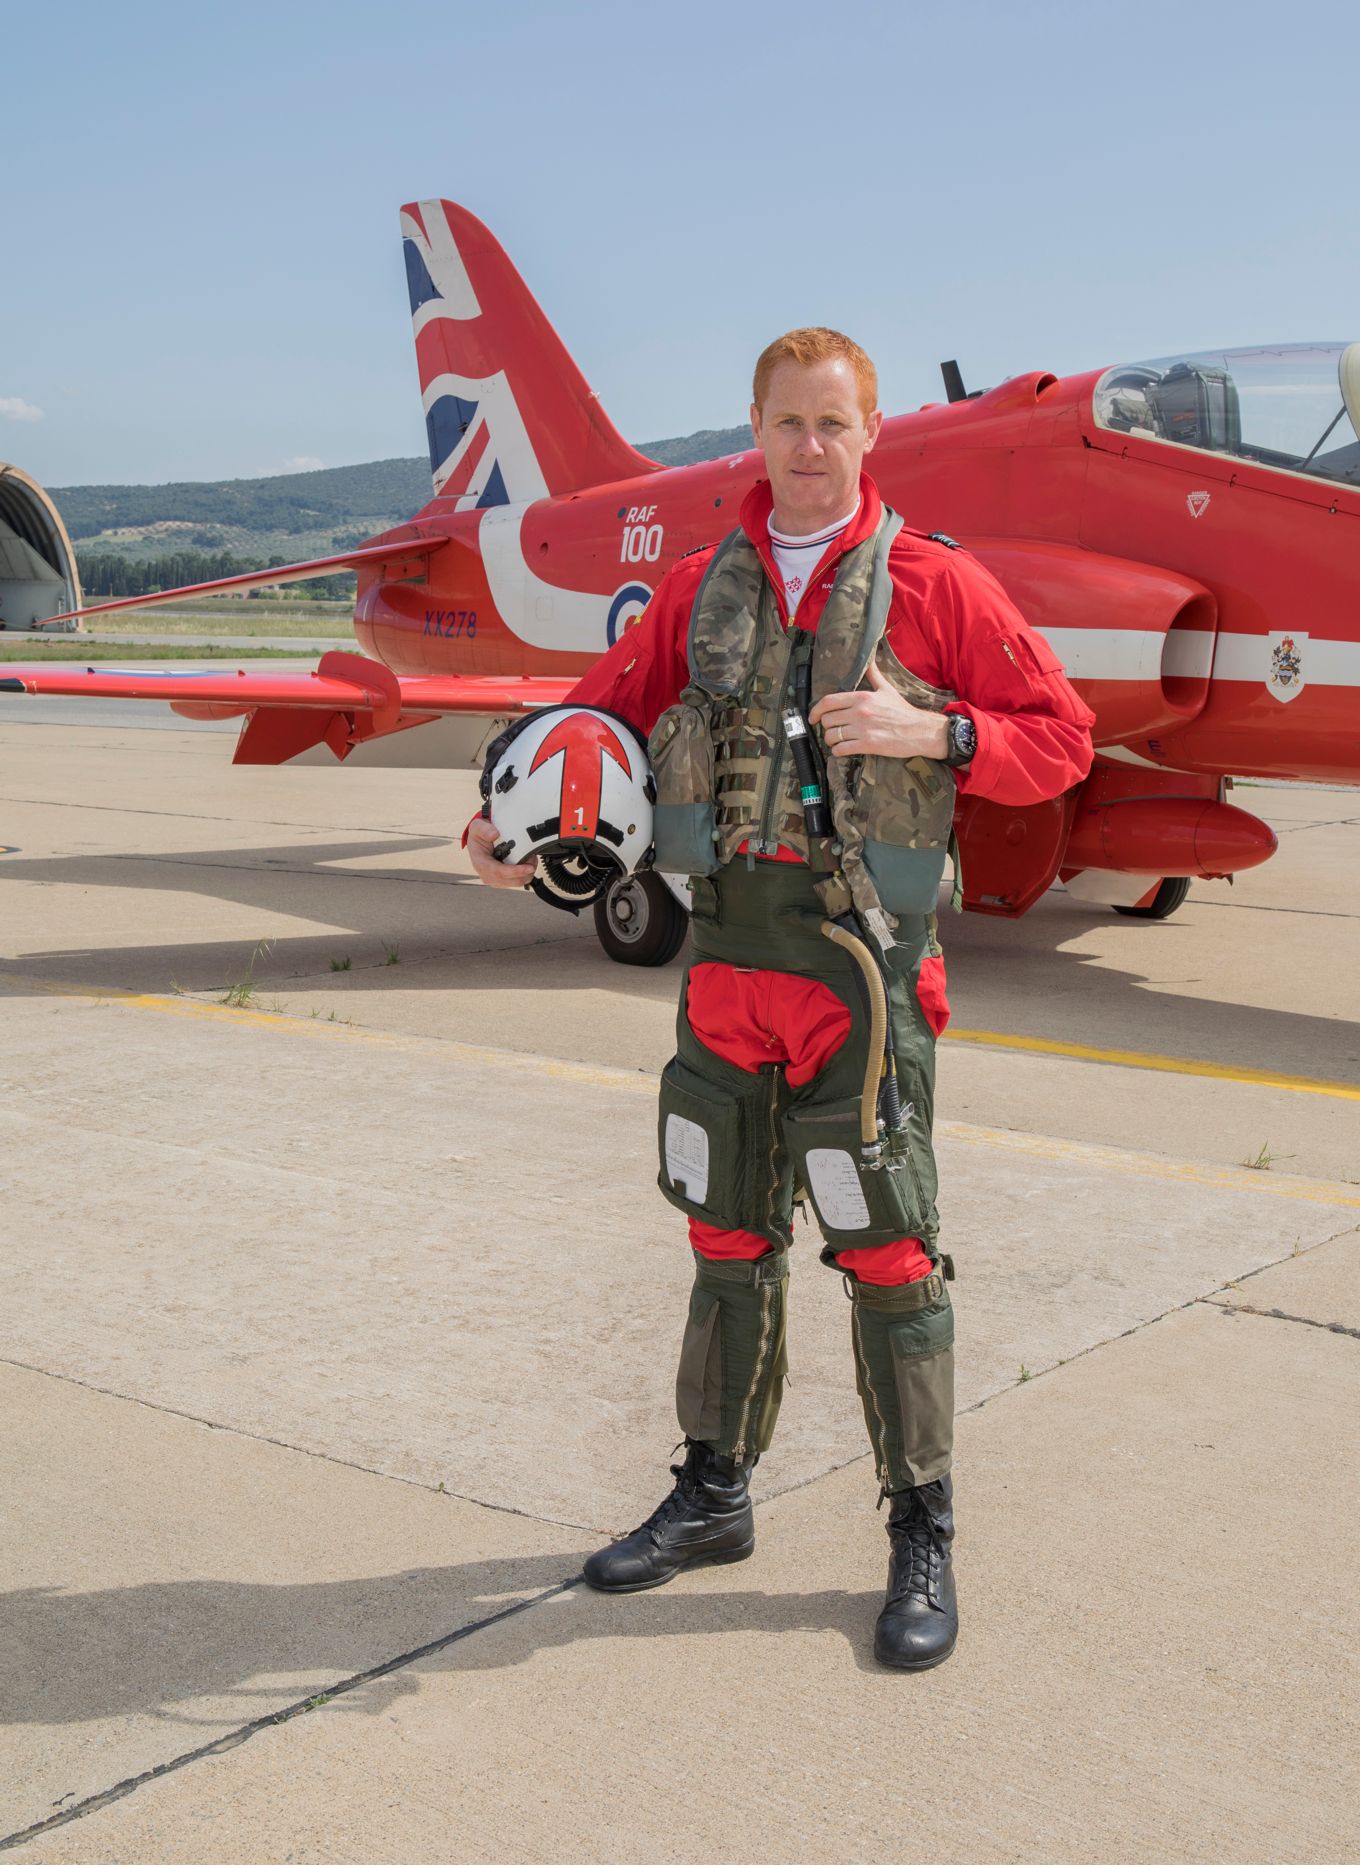 Squadron Leader Martin Pert was Red 1, beginning with the 2018 season.